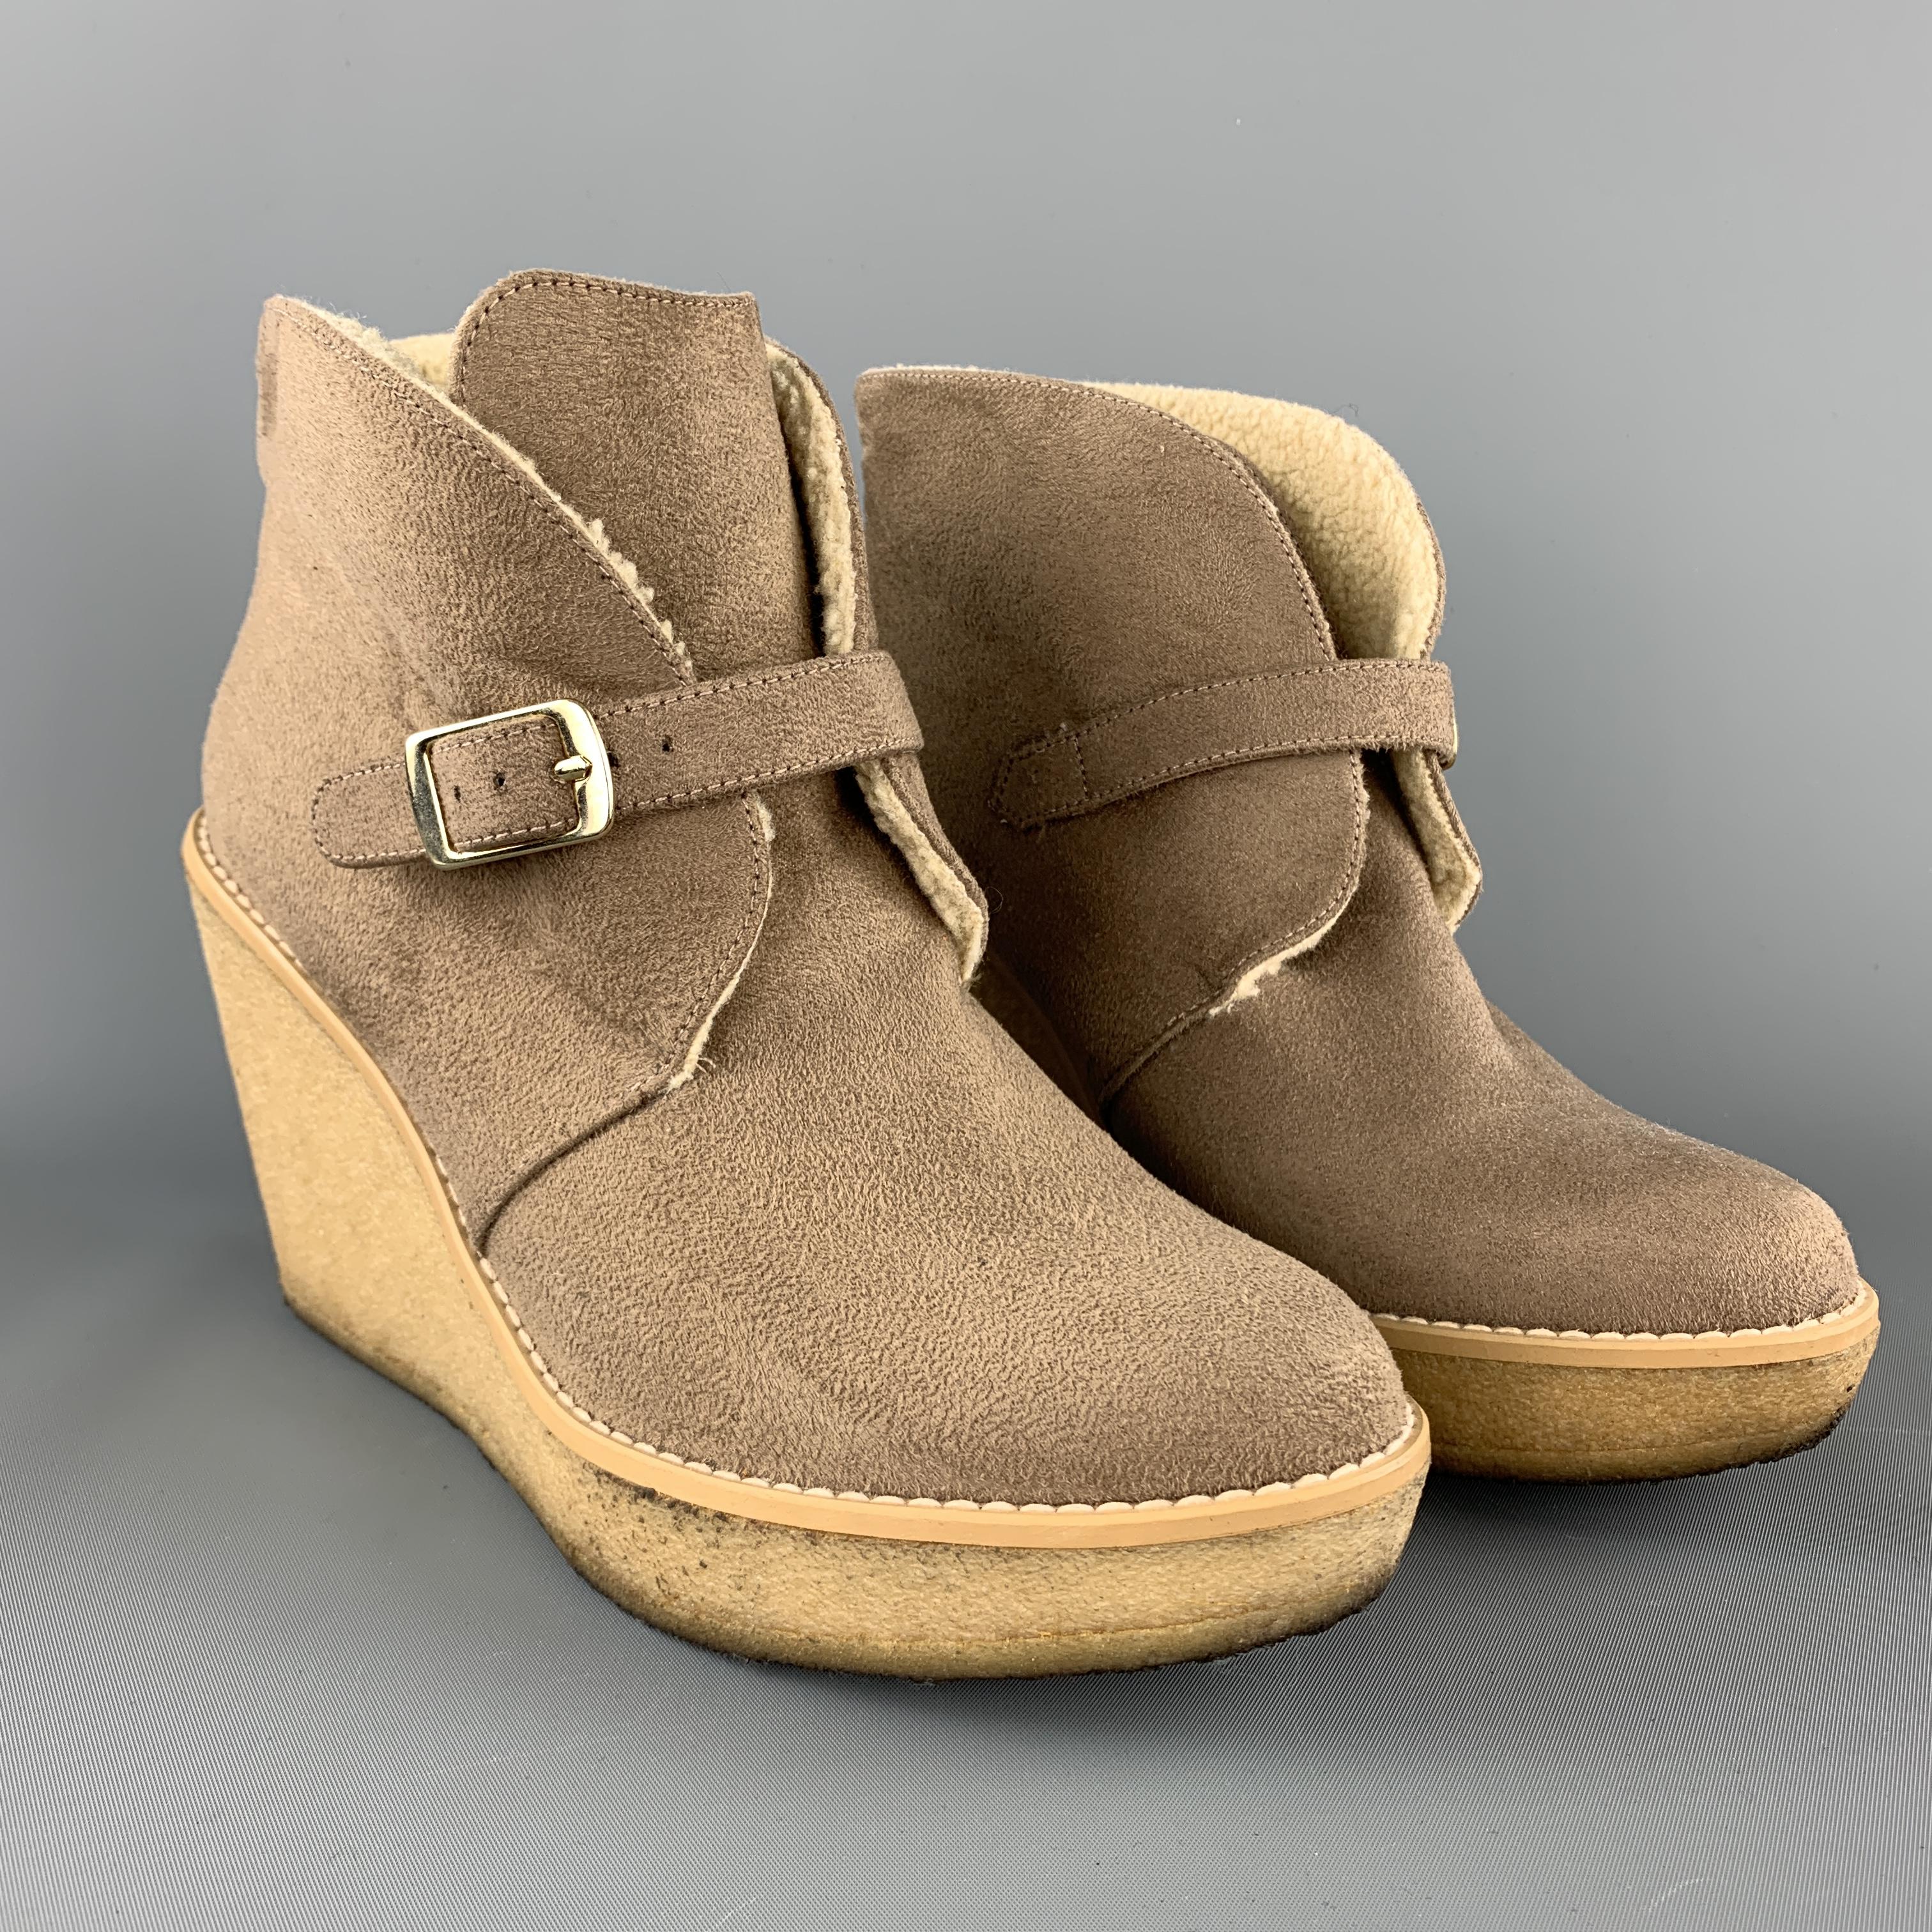 STELLA MCCARTNEY ankle booties come in vegan faux shearling suede with a strap closure and gum wedge sole. Made in Spain.

Good Pre-Owned Condition.
Marked: IT 37

Measurements:

Heel: 3.75 in.
Platform: 1 in.